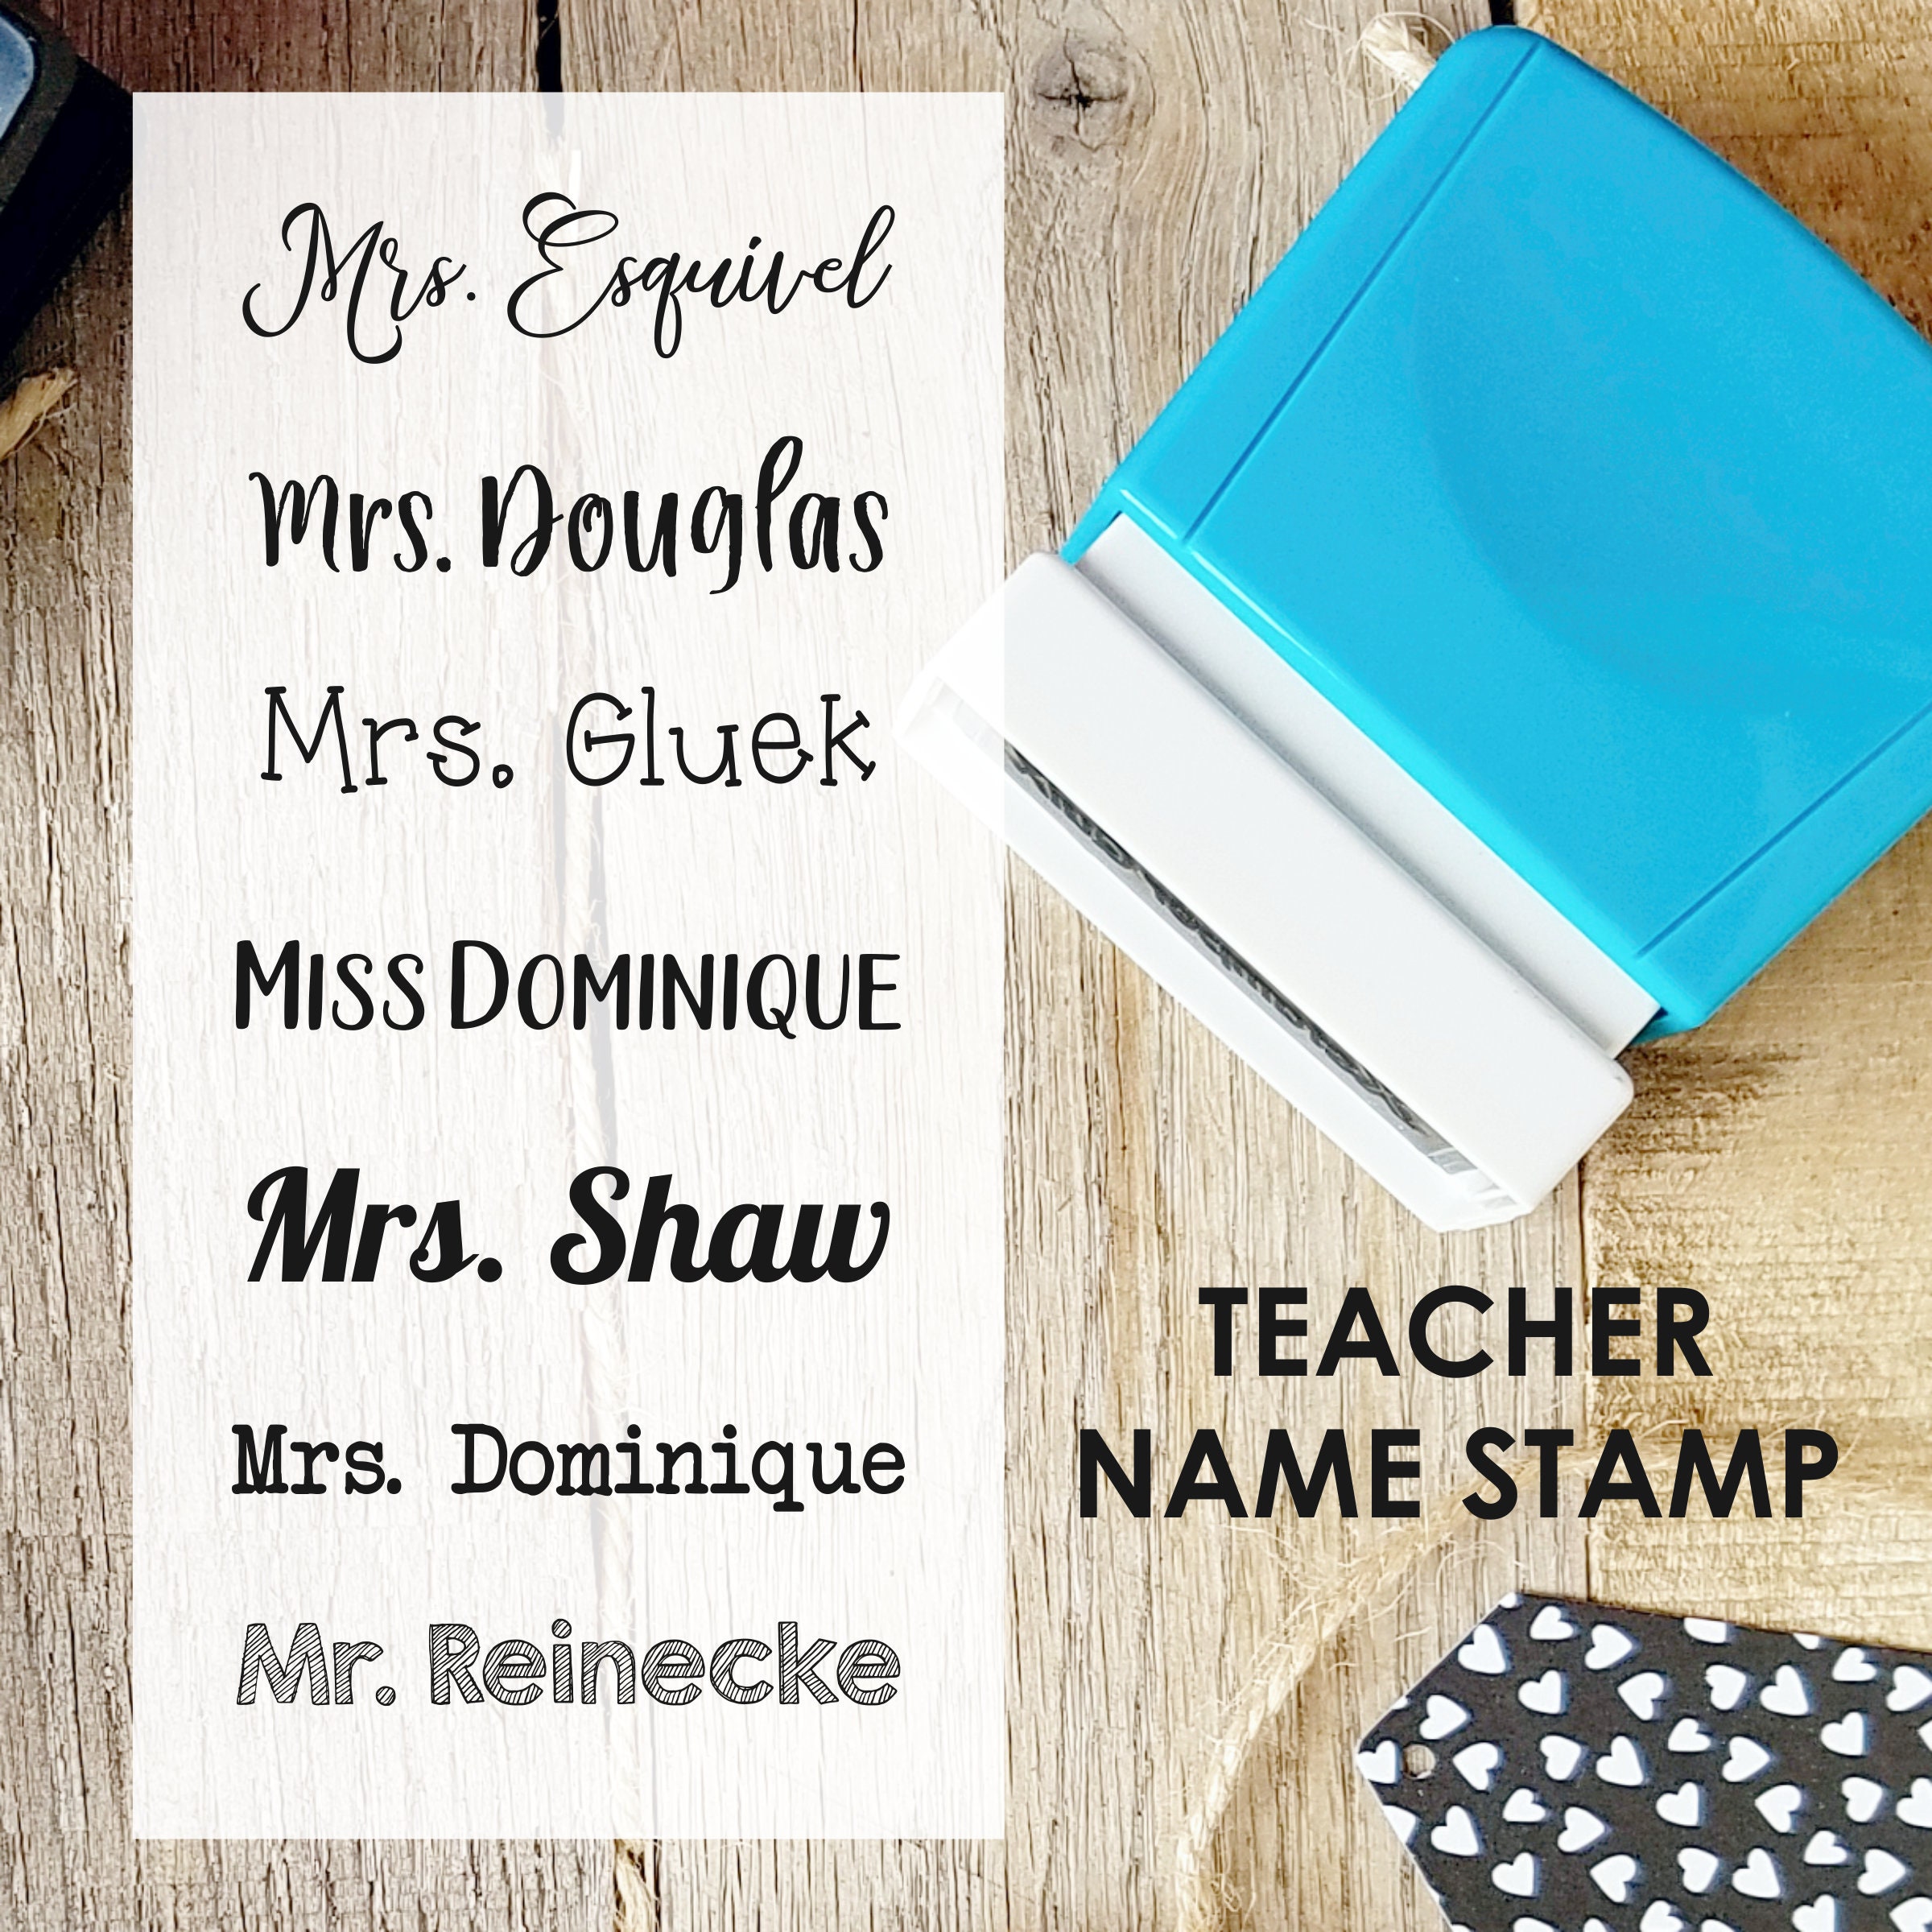 Personalized Name and Date Stamp Custom Checked by Teacher Name